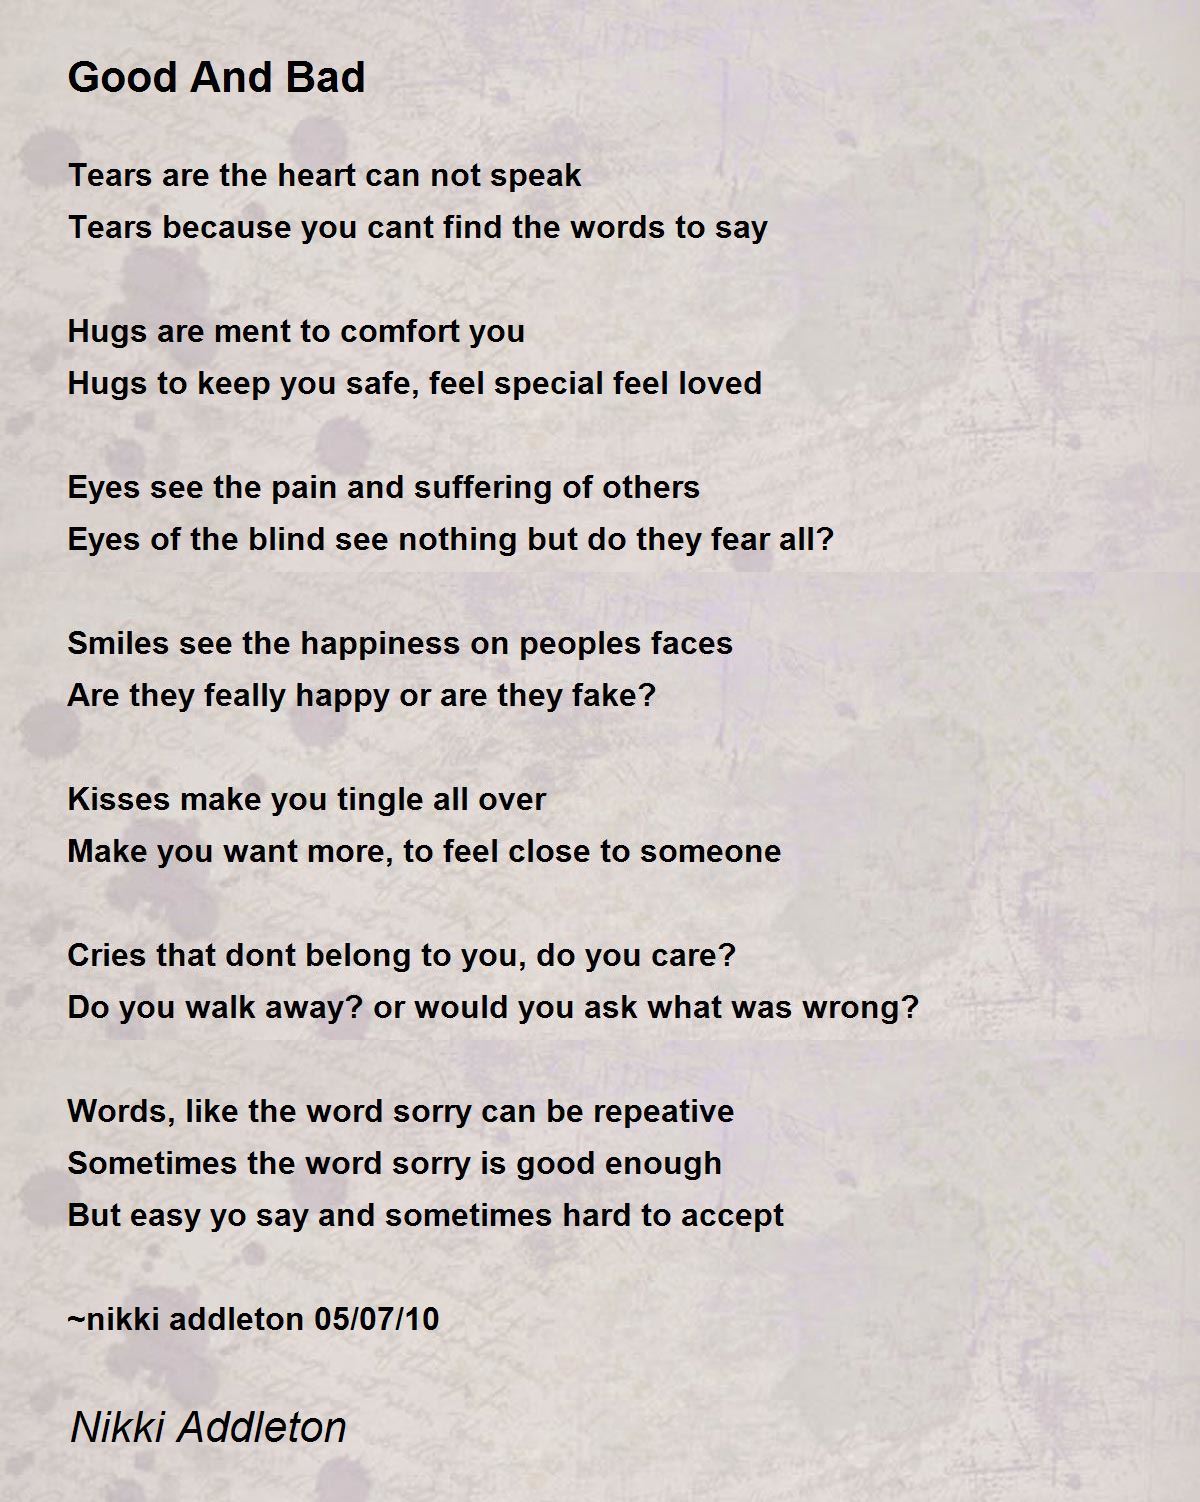 Good And Bad - Good And Bad Poem by Nikki Addleton